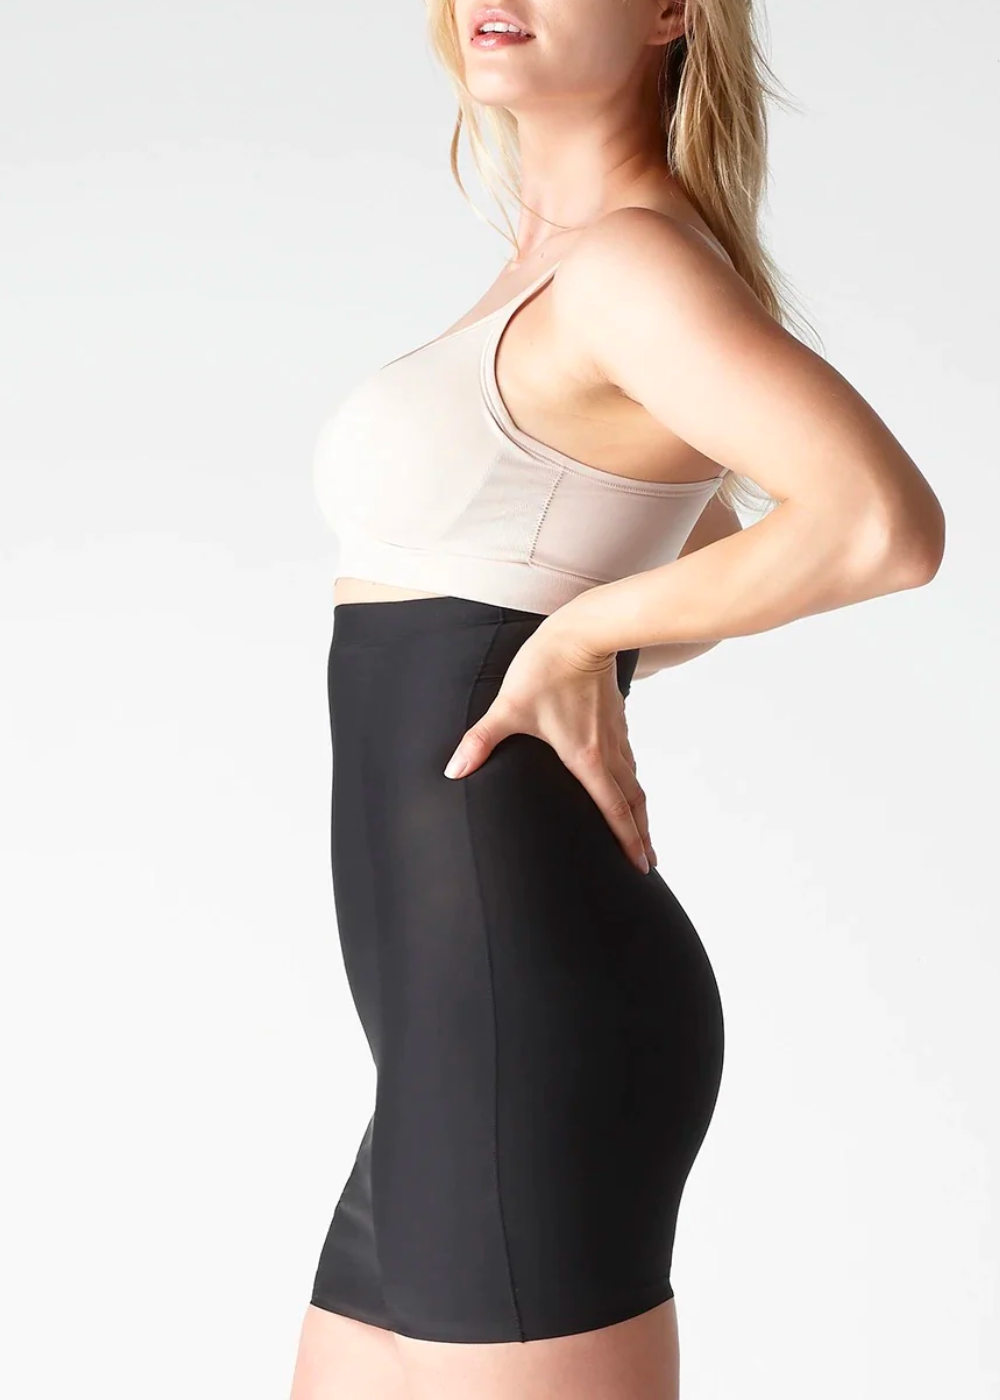 Yummie Black Hidden Curves Firm Shaping High Waist Skirt Slip Shapewear -  $25 New With Tags - From Diana